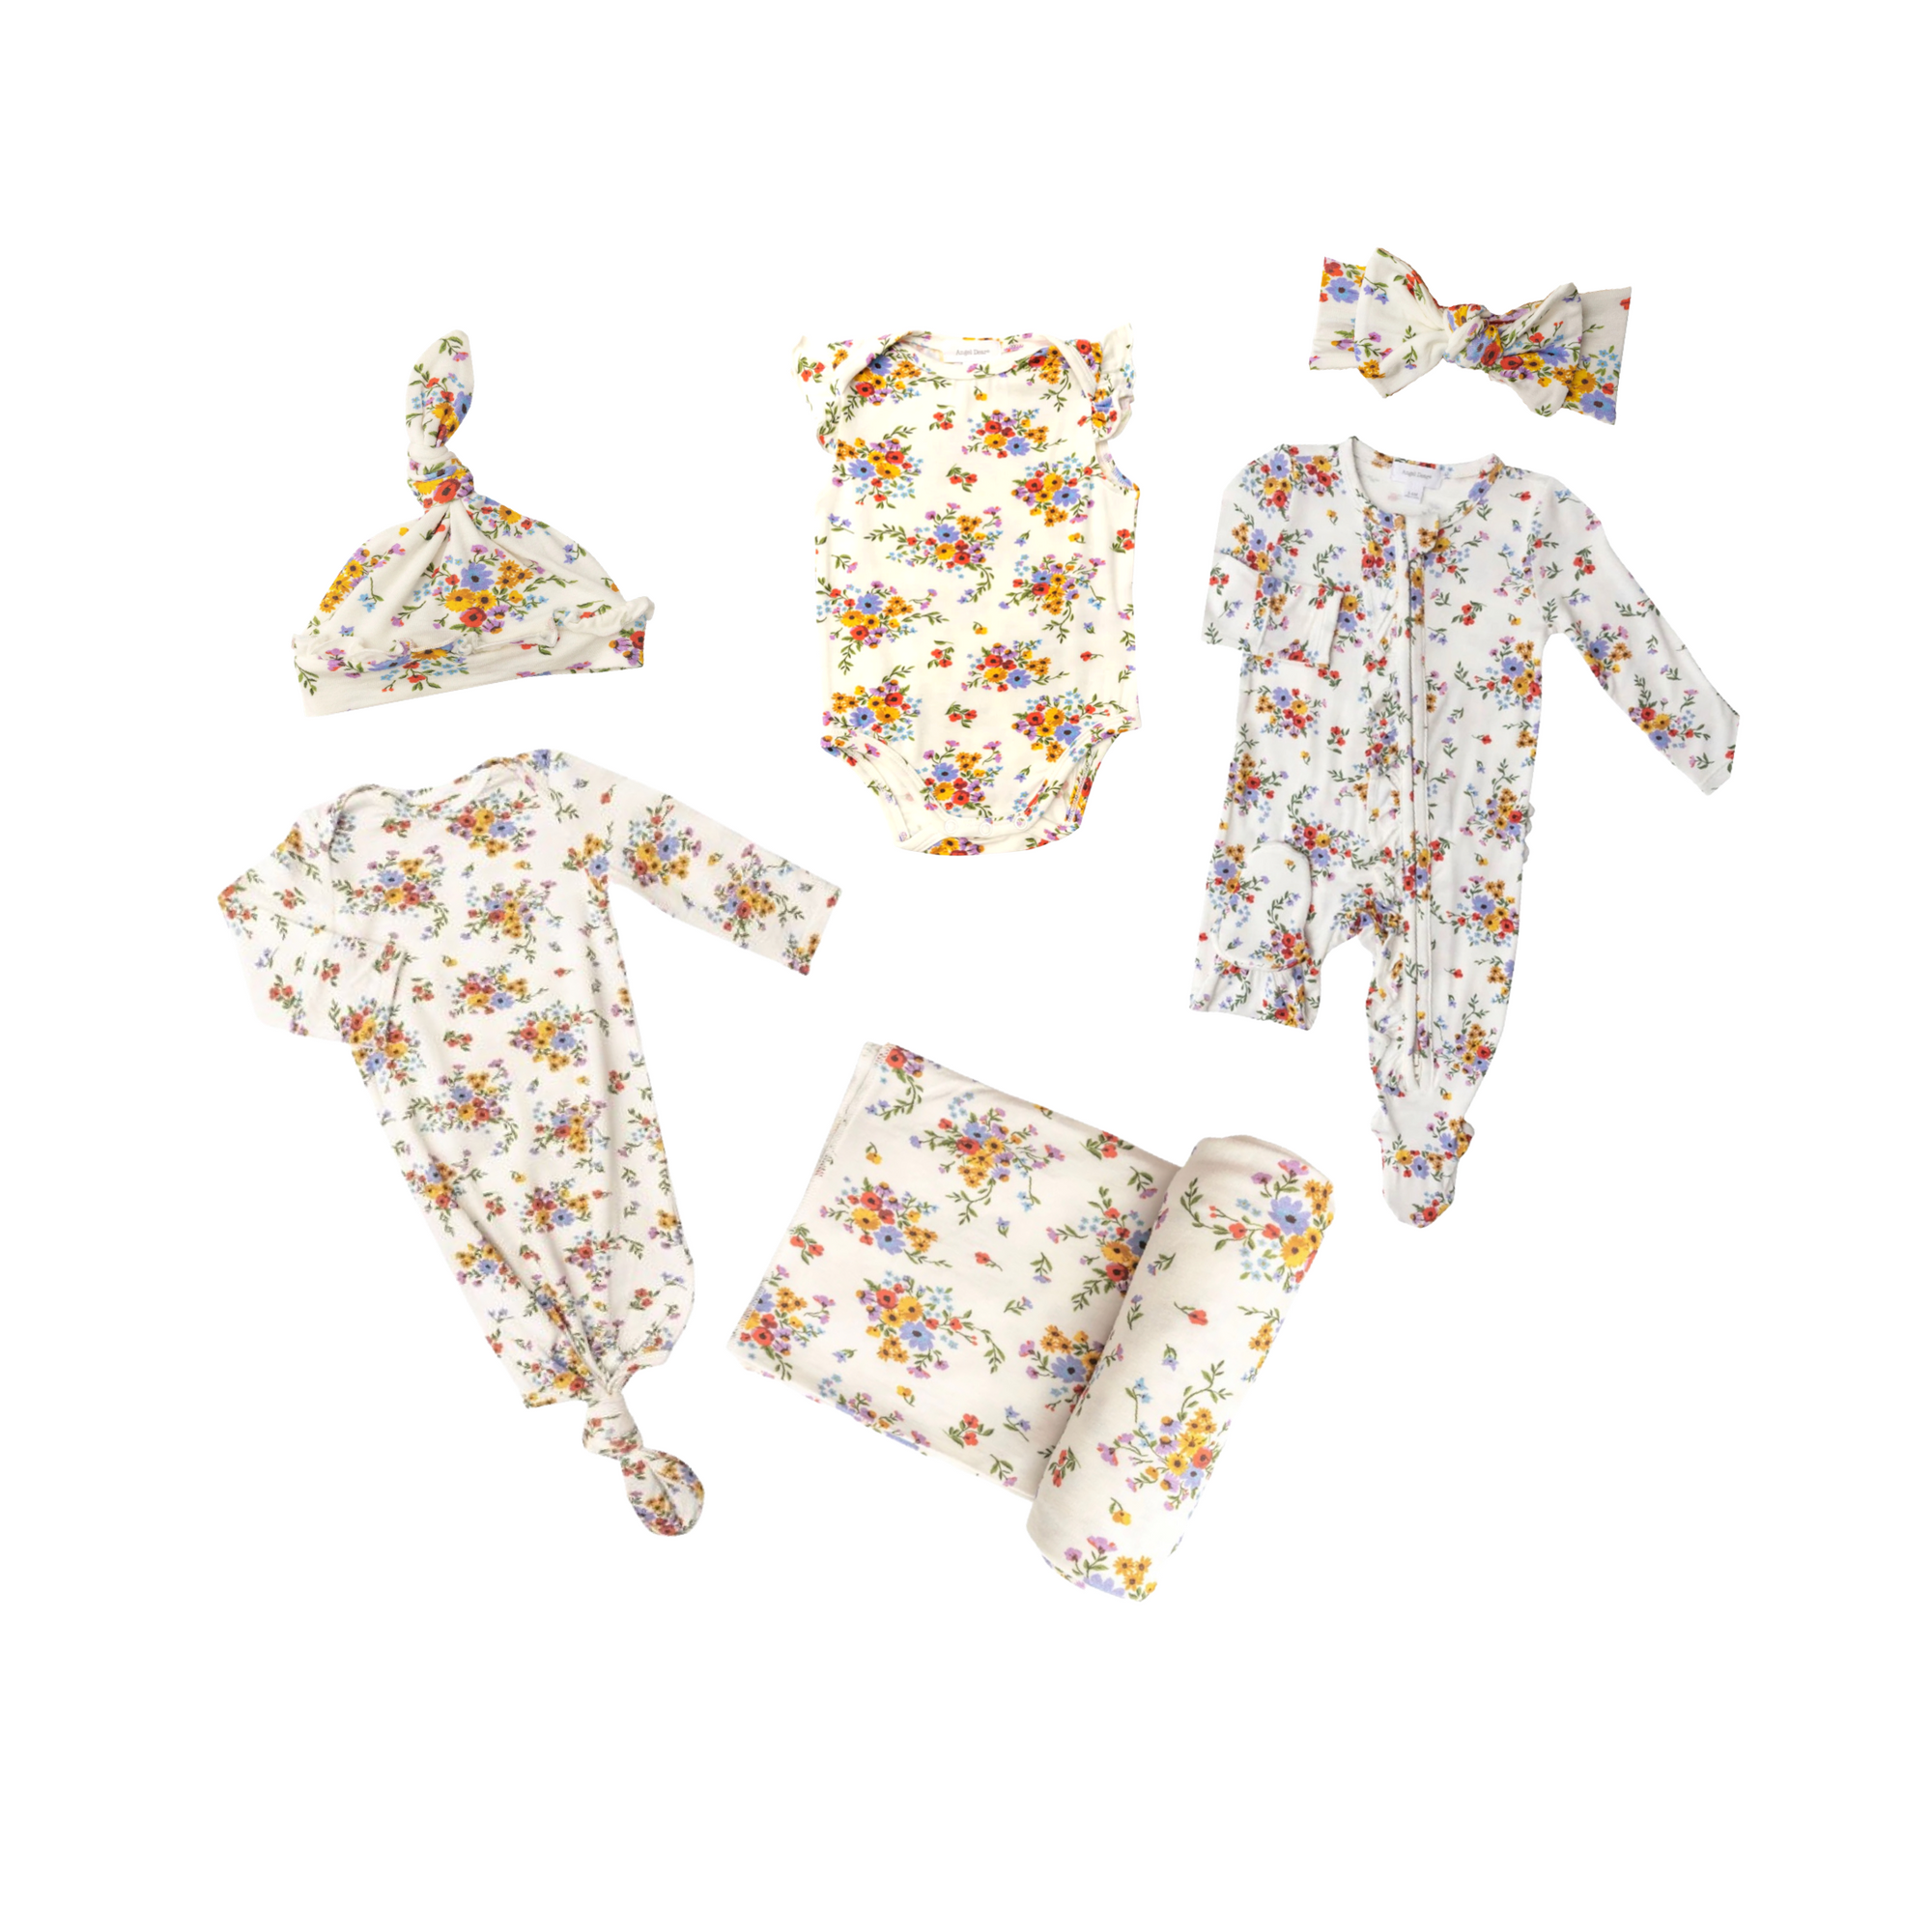 American Bouquet Swaddle